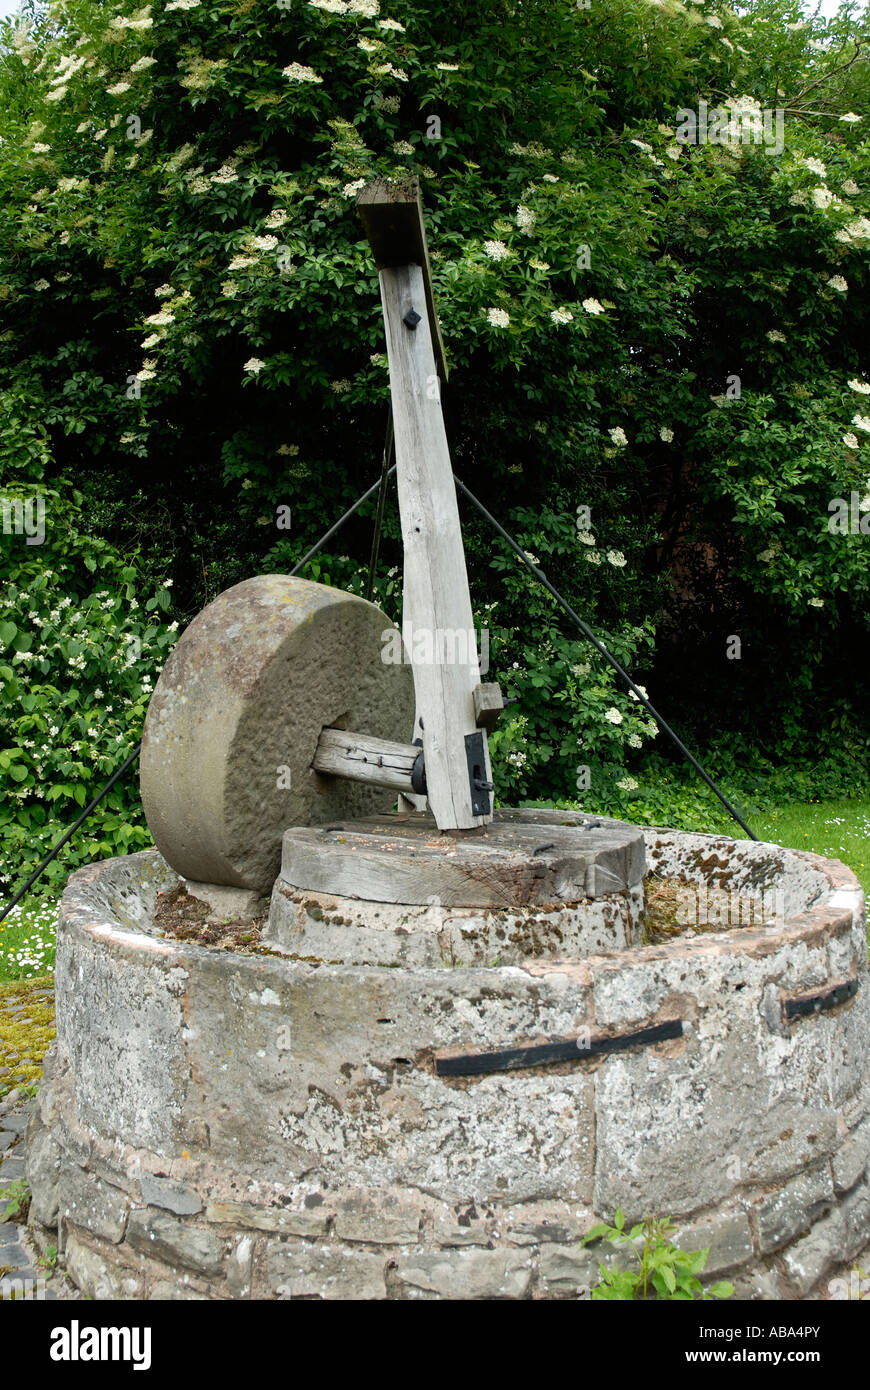 An old apple press in Hereford. These presses were used in the making of cider, it now is used as decoration. Stock Photo